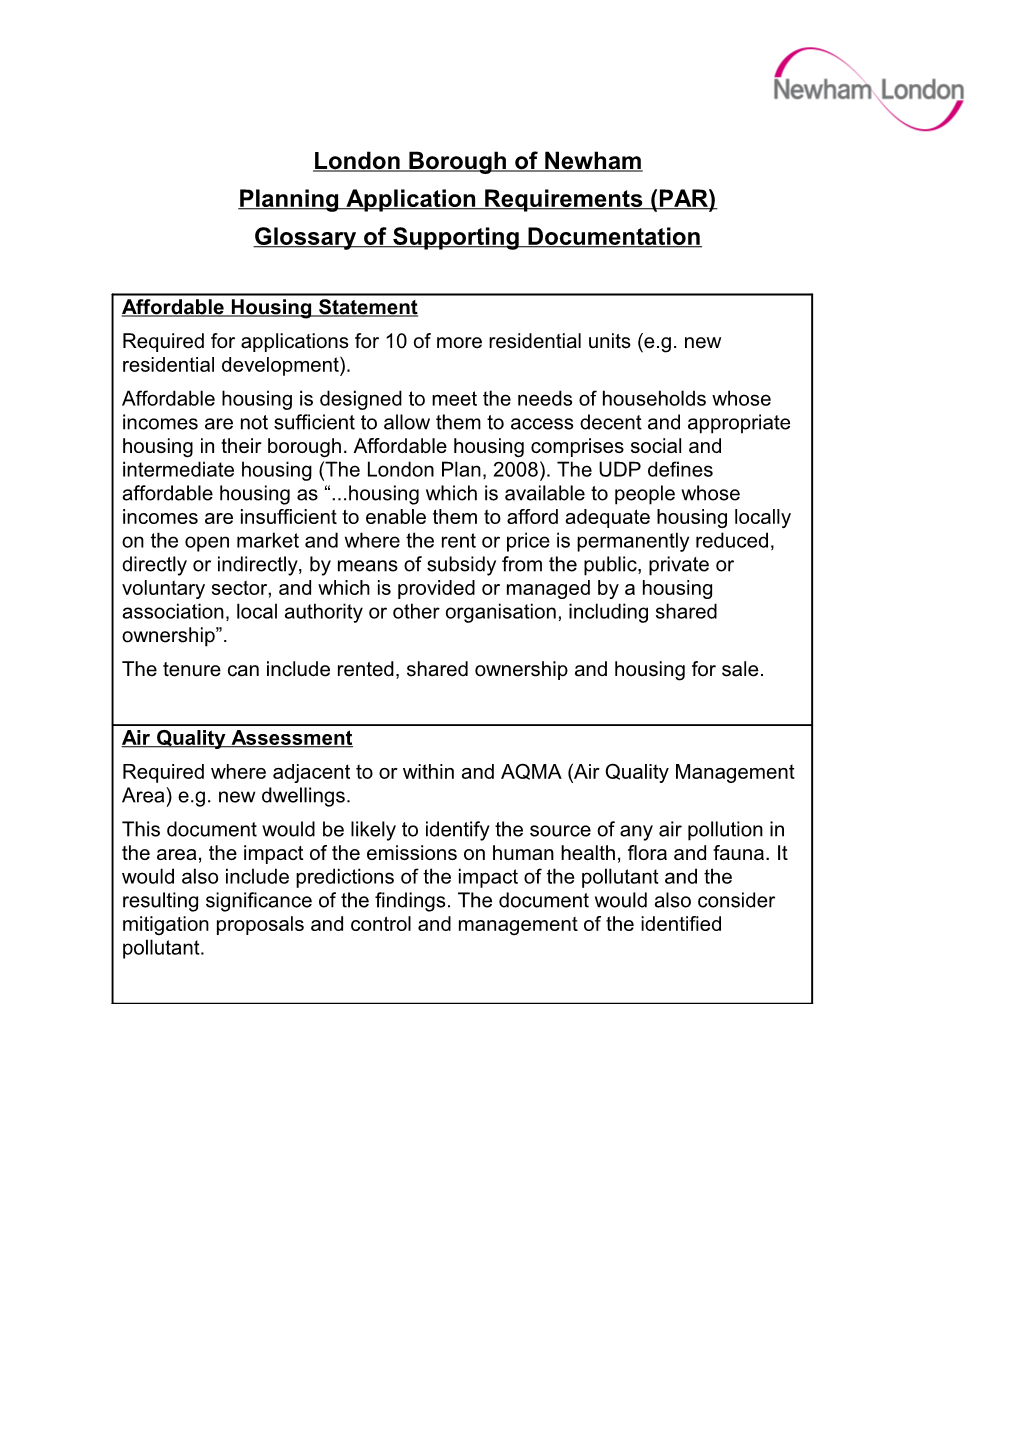 Glossary of Supporting Documents